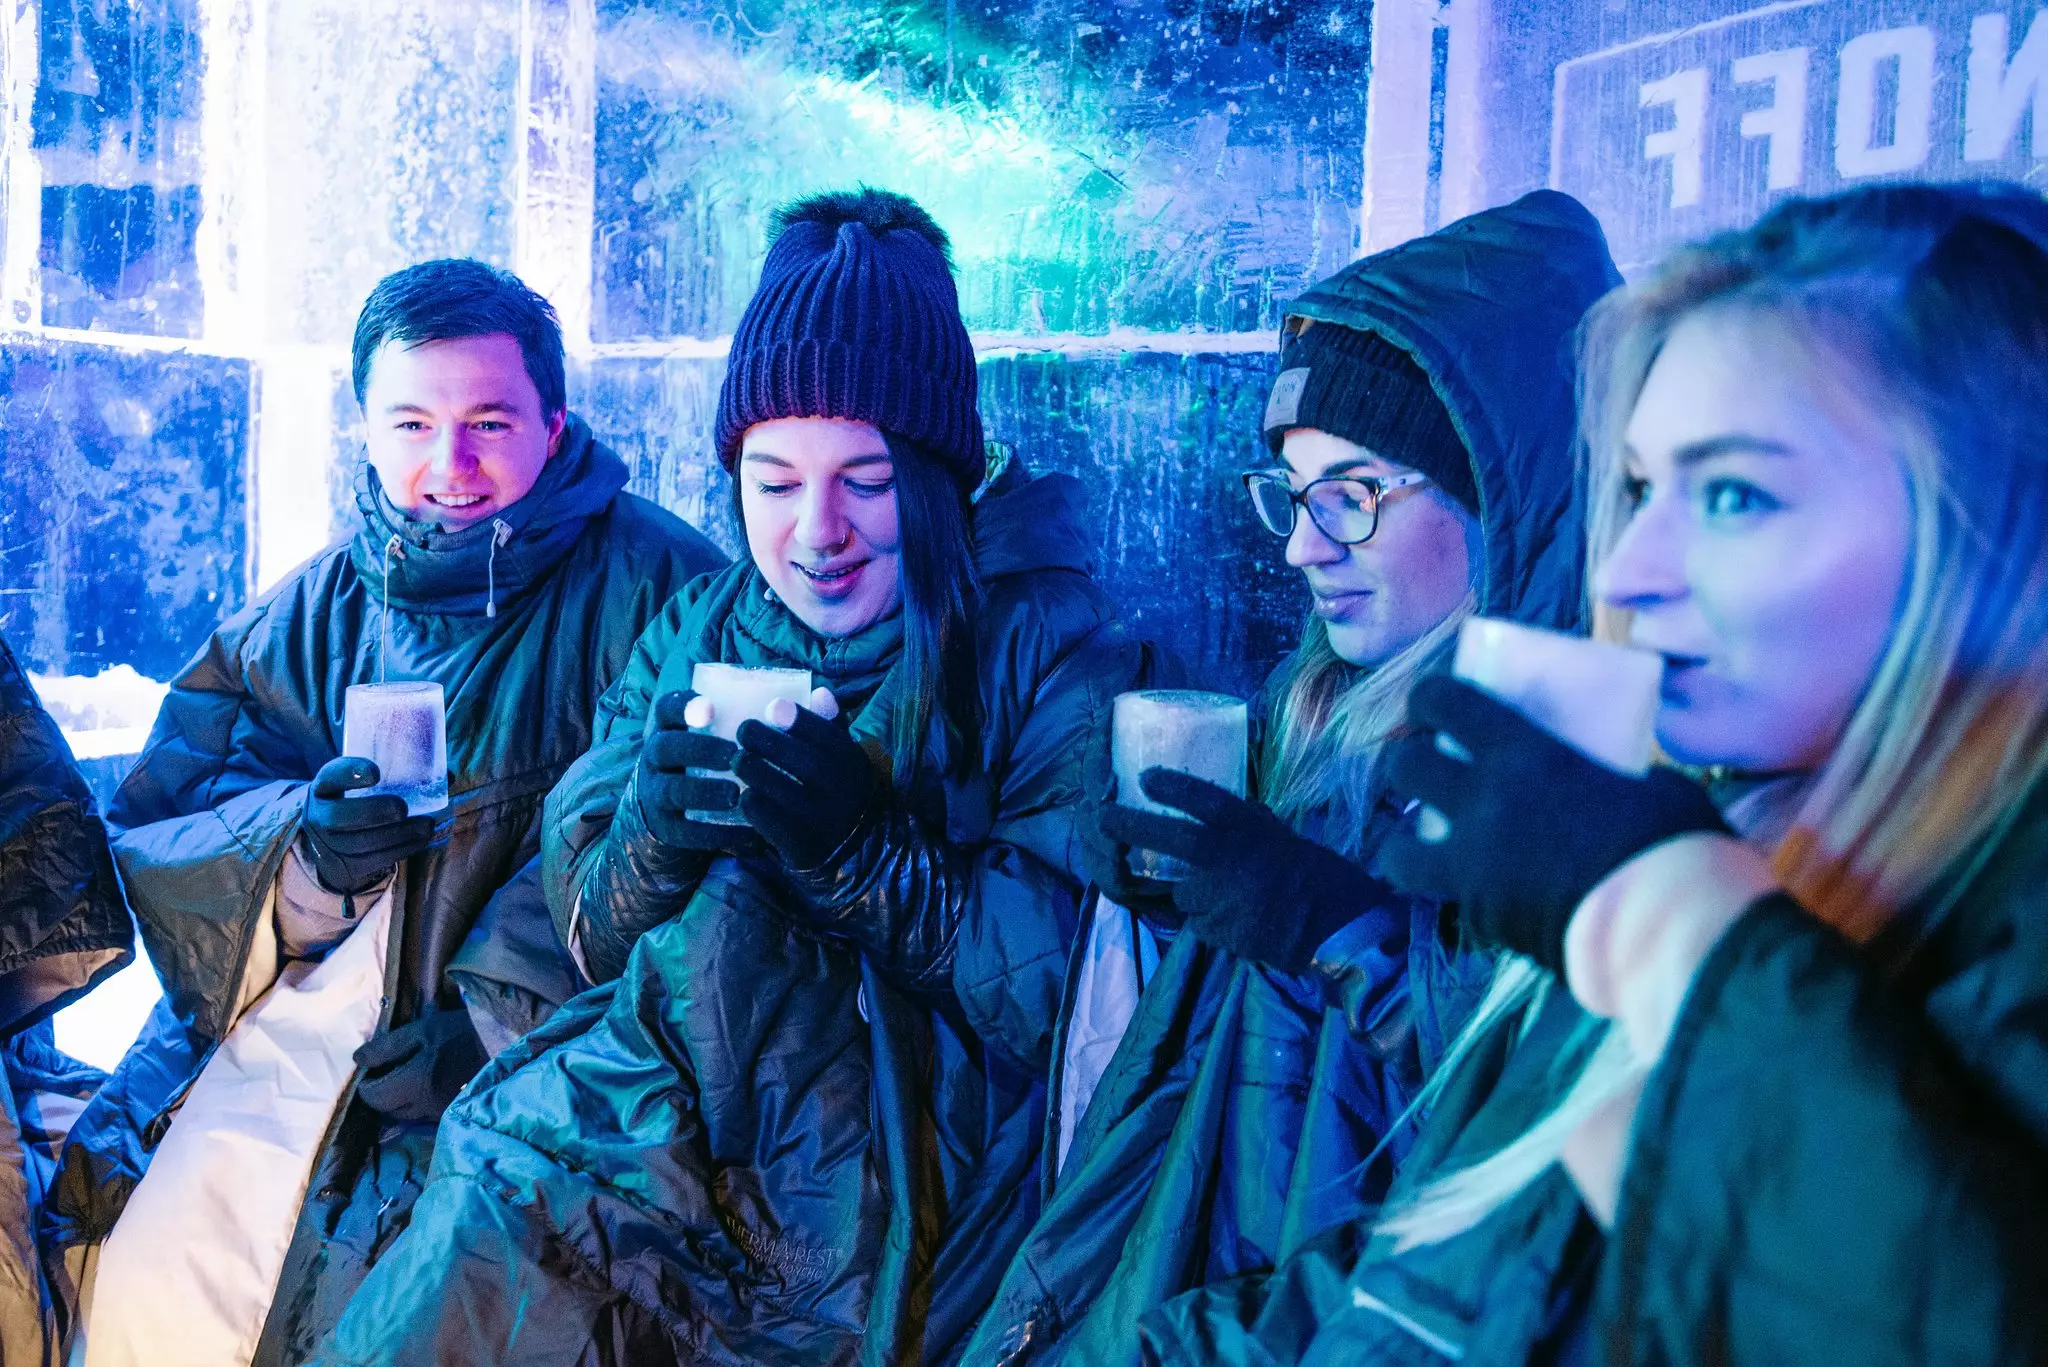 Round off the night with cocktails at the Ice Bar (